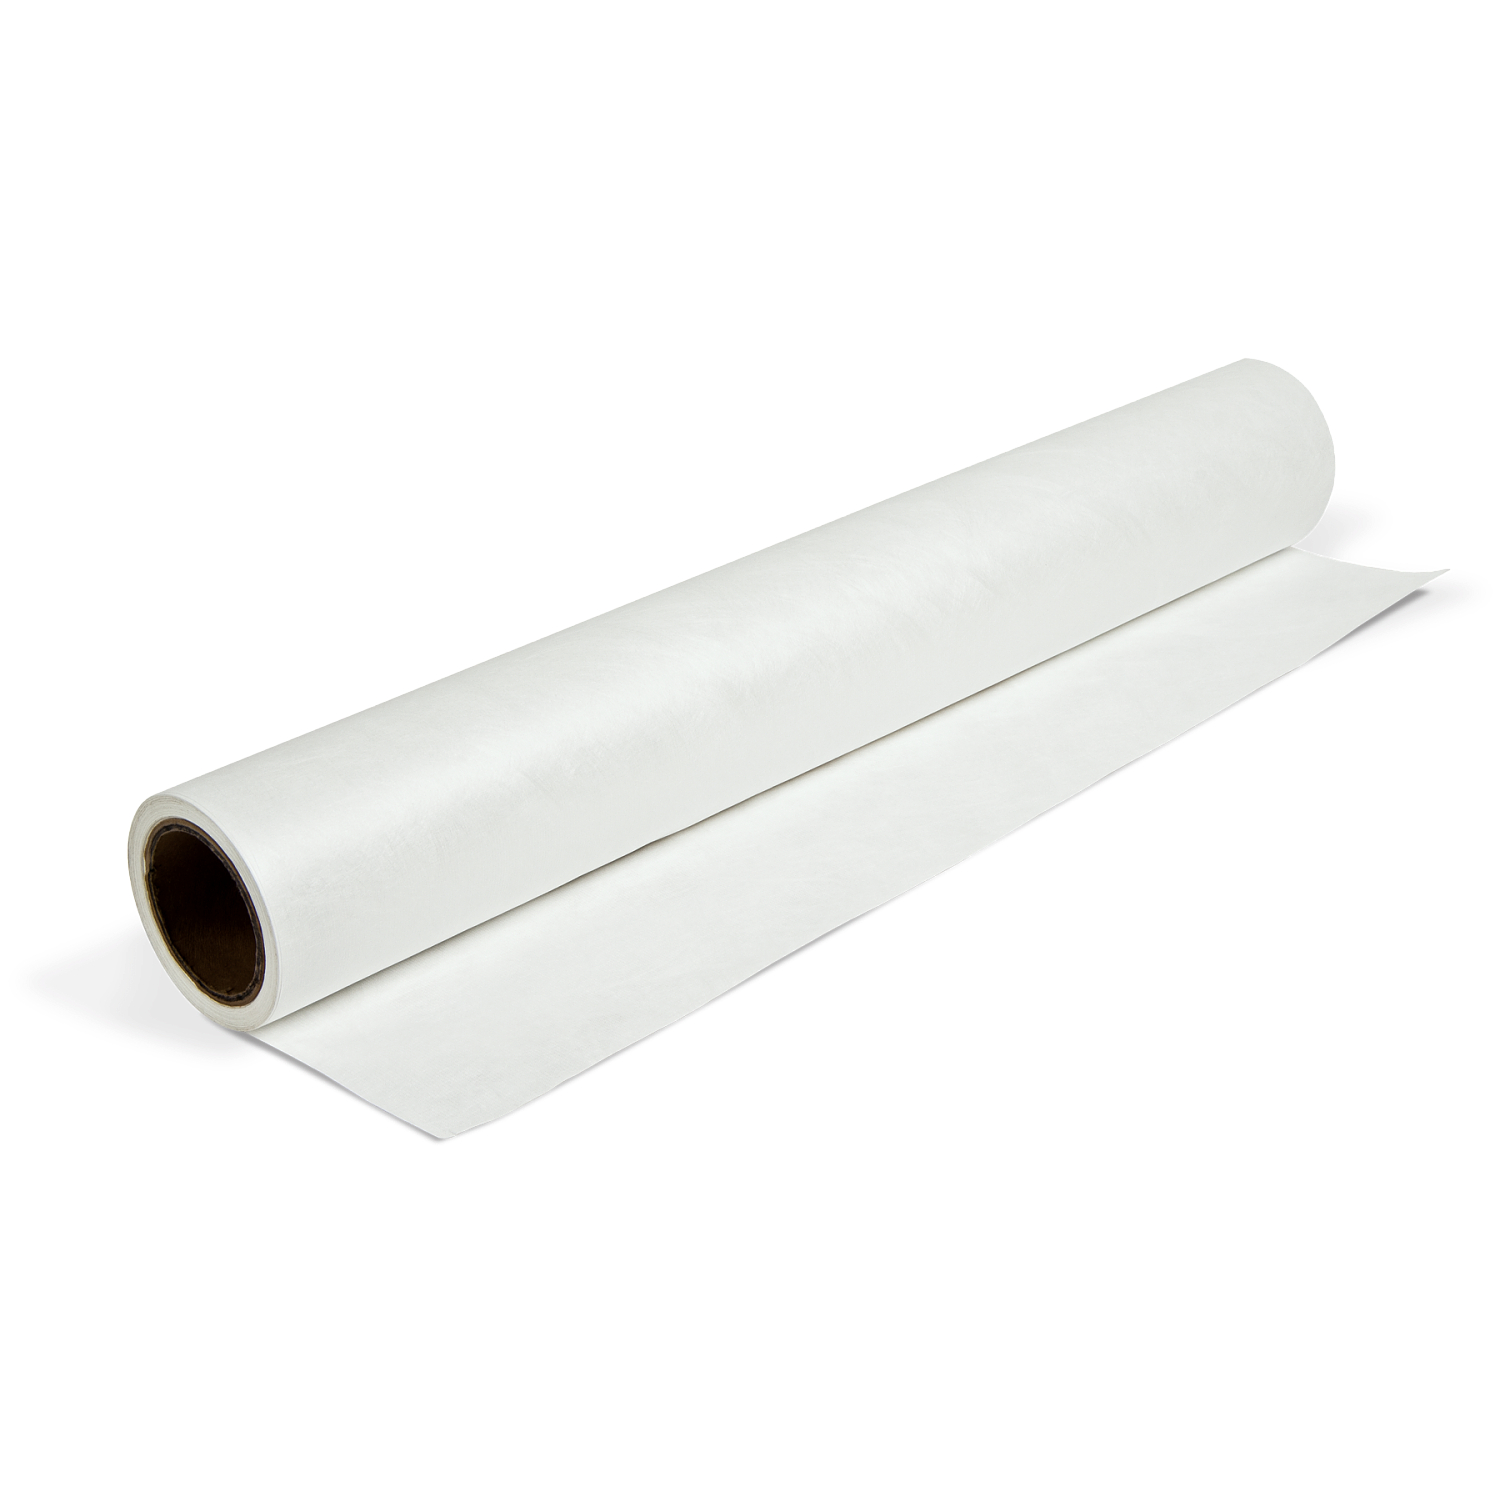 Tyvek®Sheets for the Arts, Crafts and Industry - 25x38 uncoated